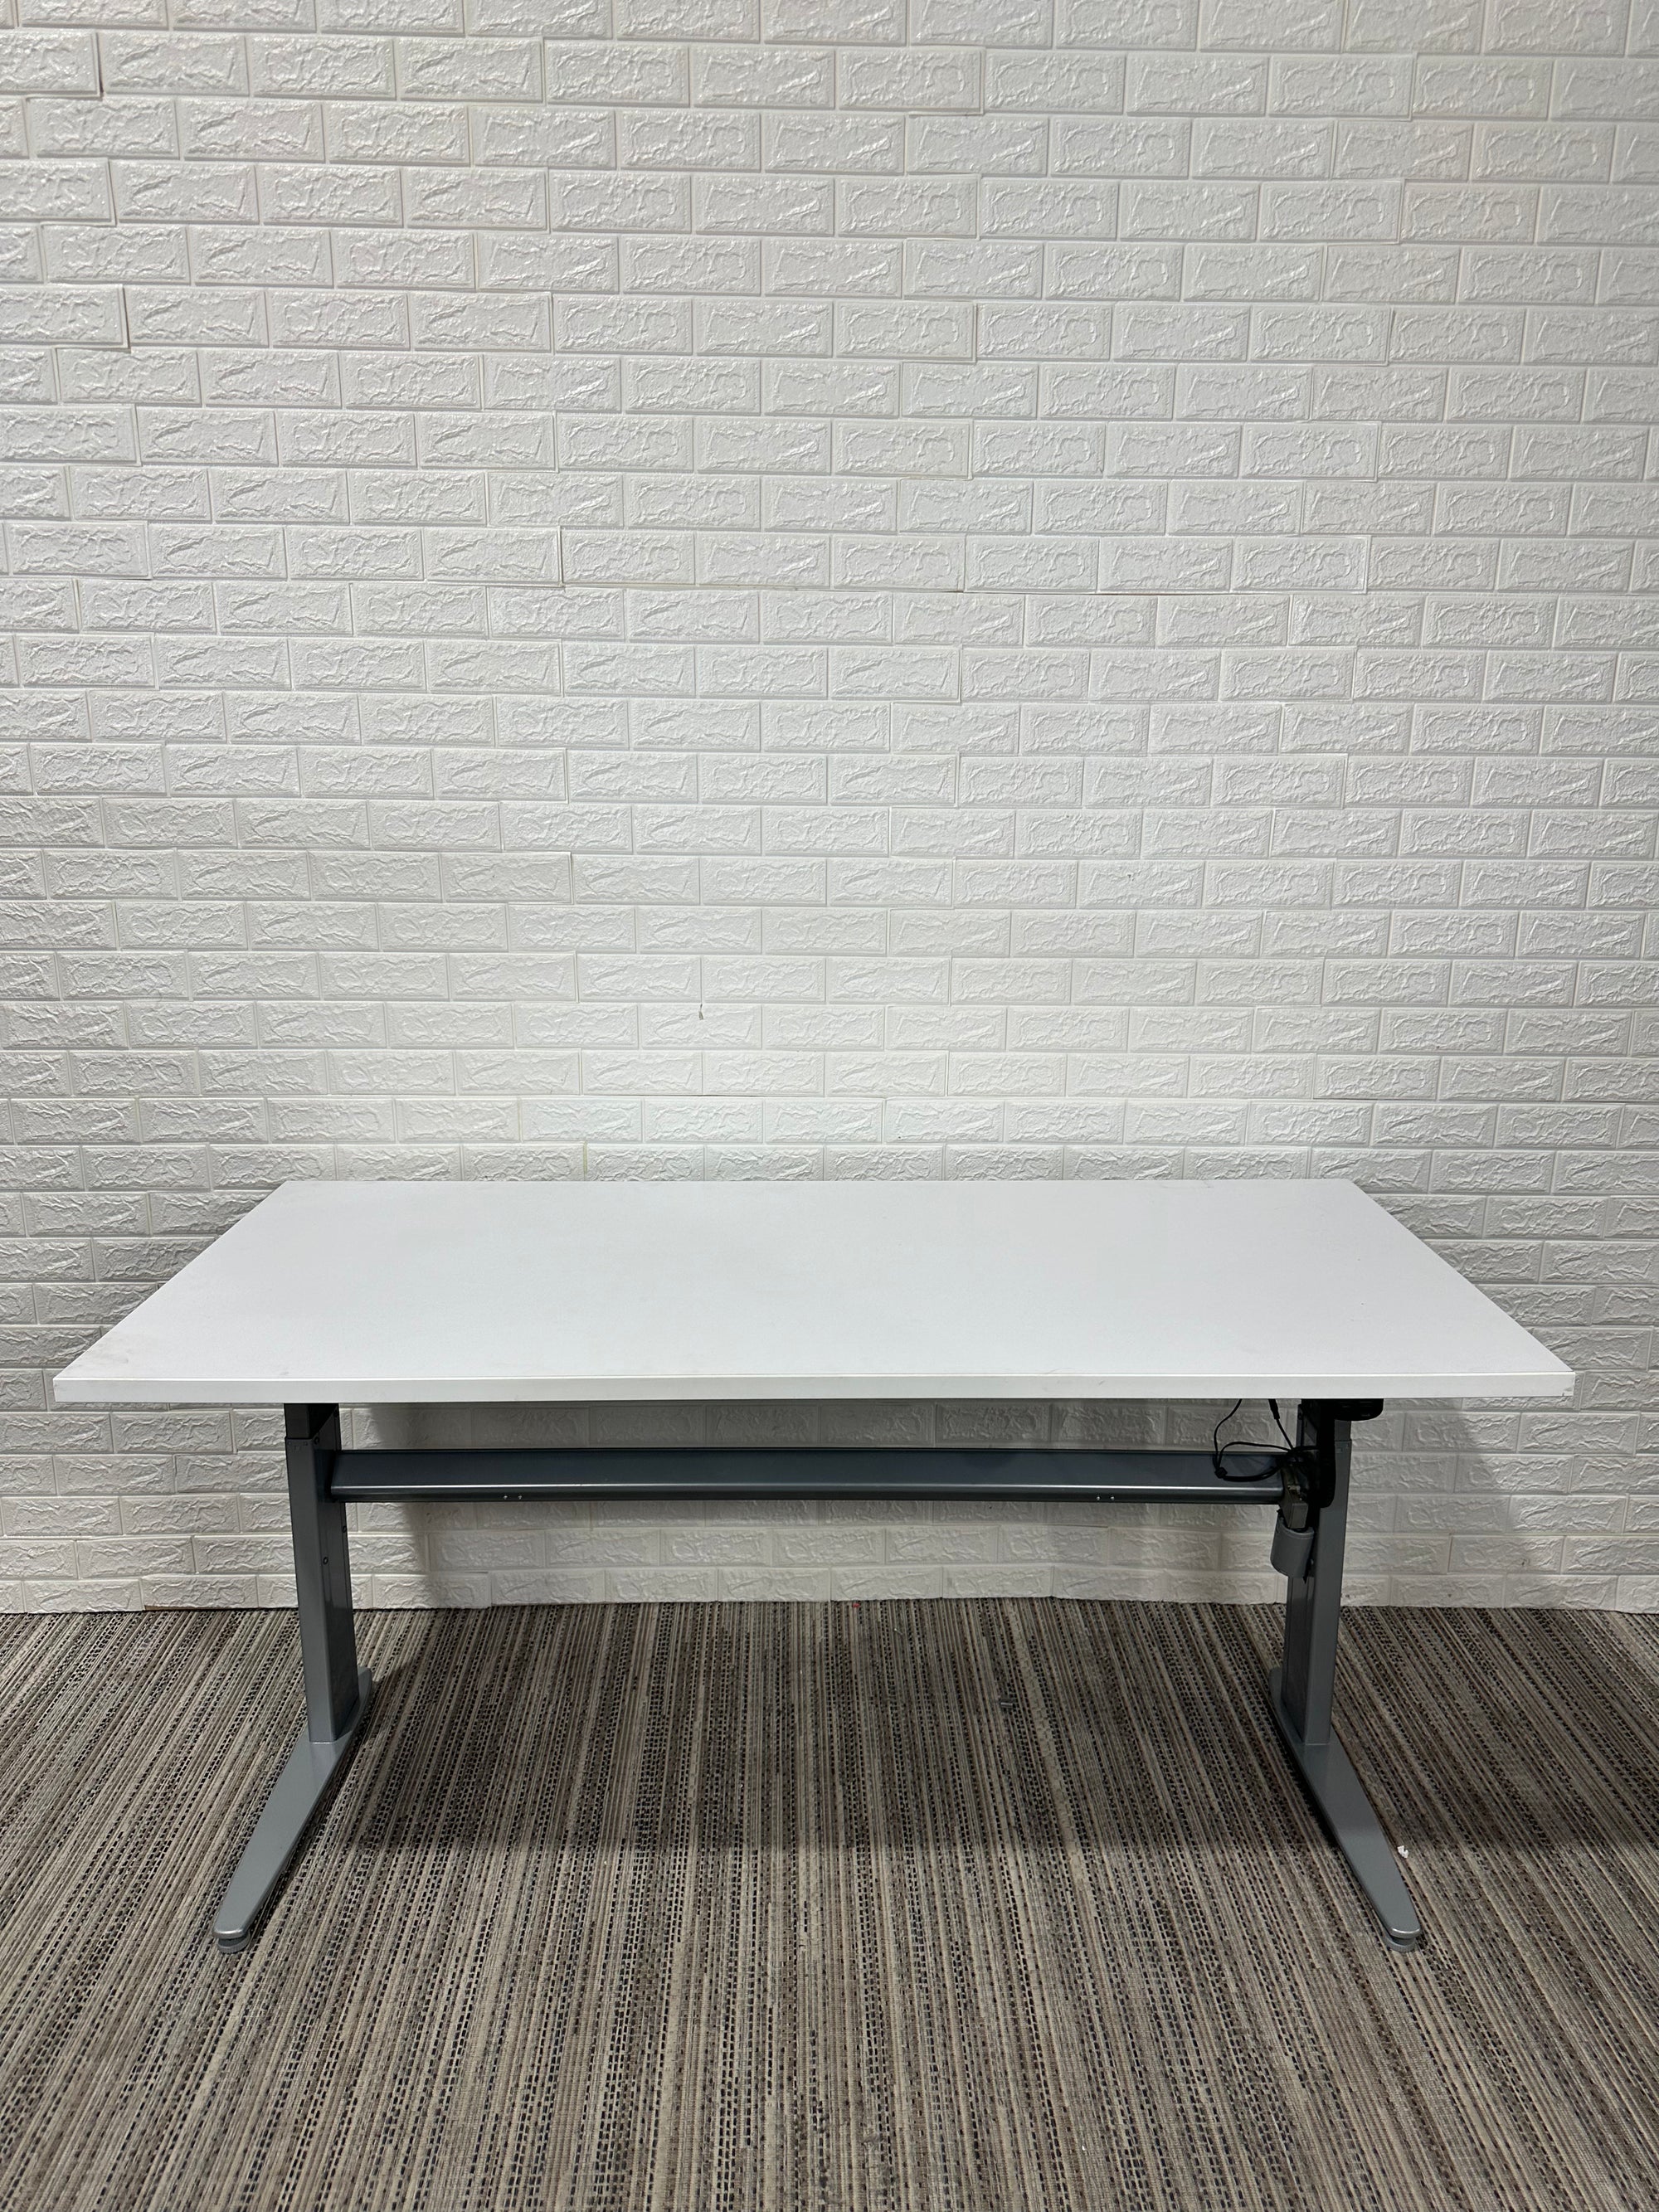 Pre-Owned Steelcase Height Adjustable Desk - Duckys Office Furniture